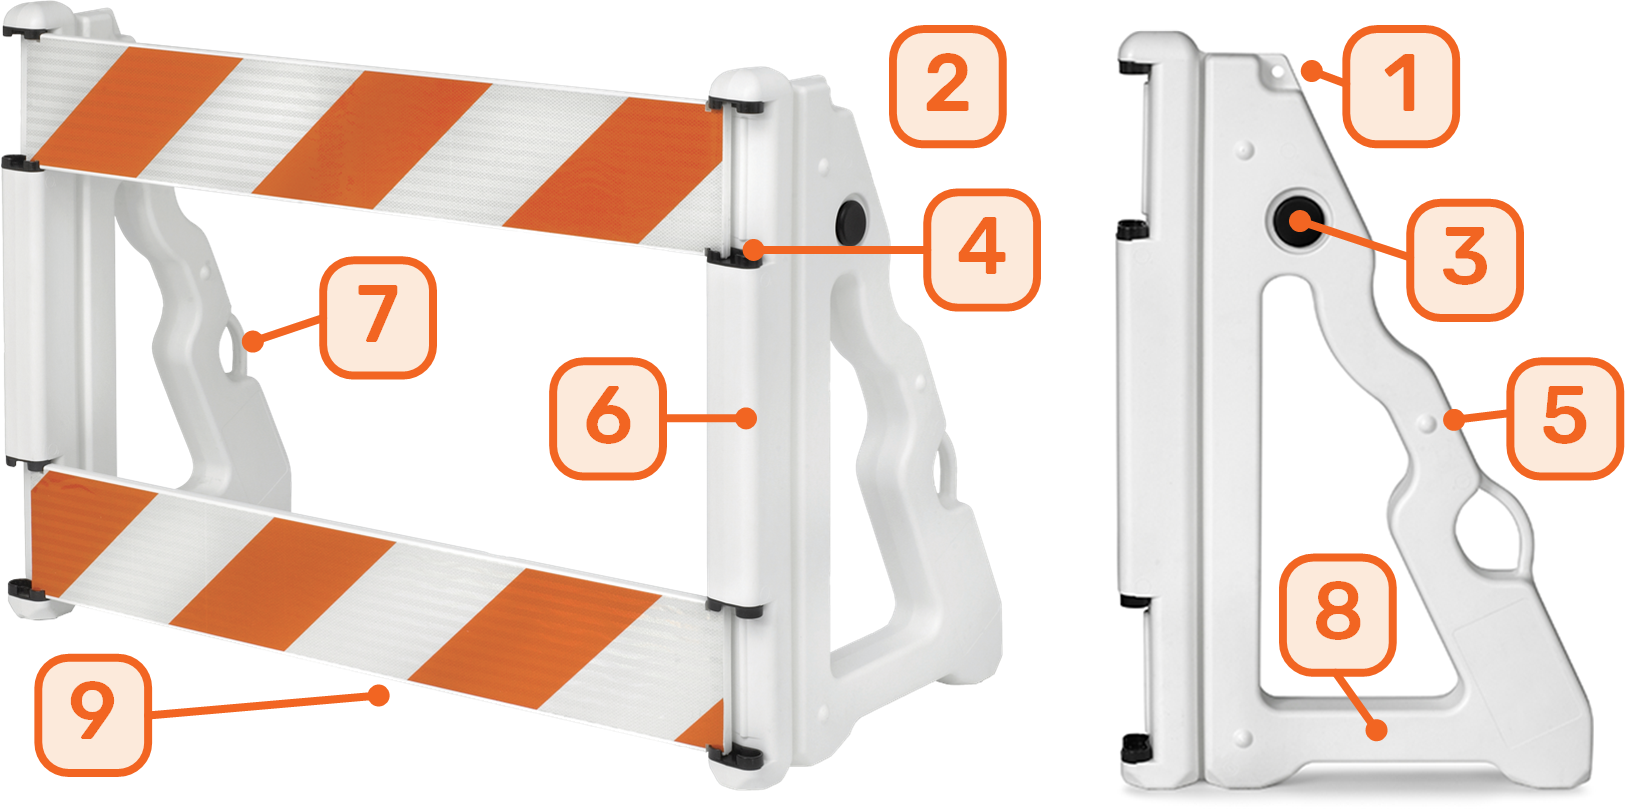 SafetyRail Plastic Barrier Features